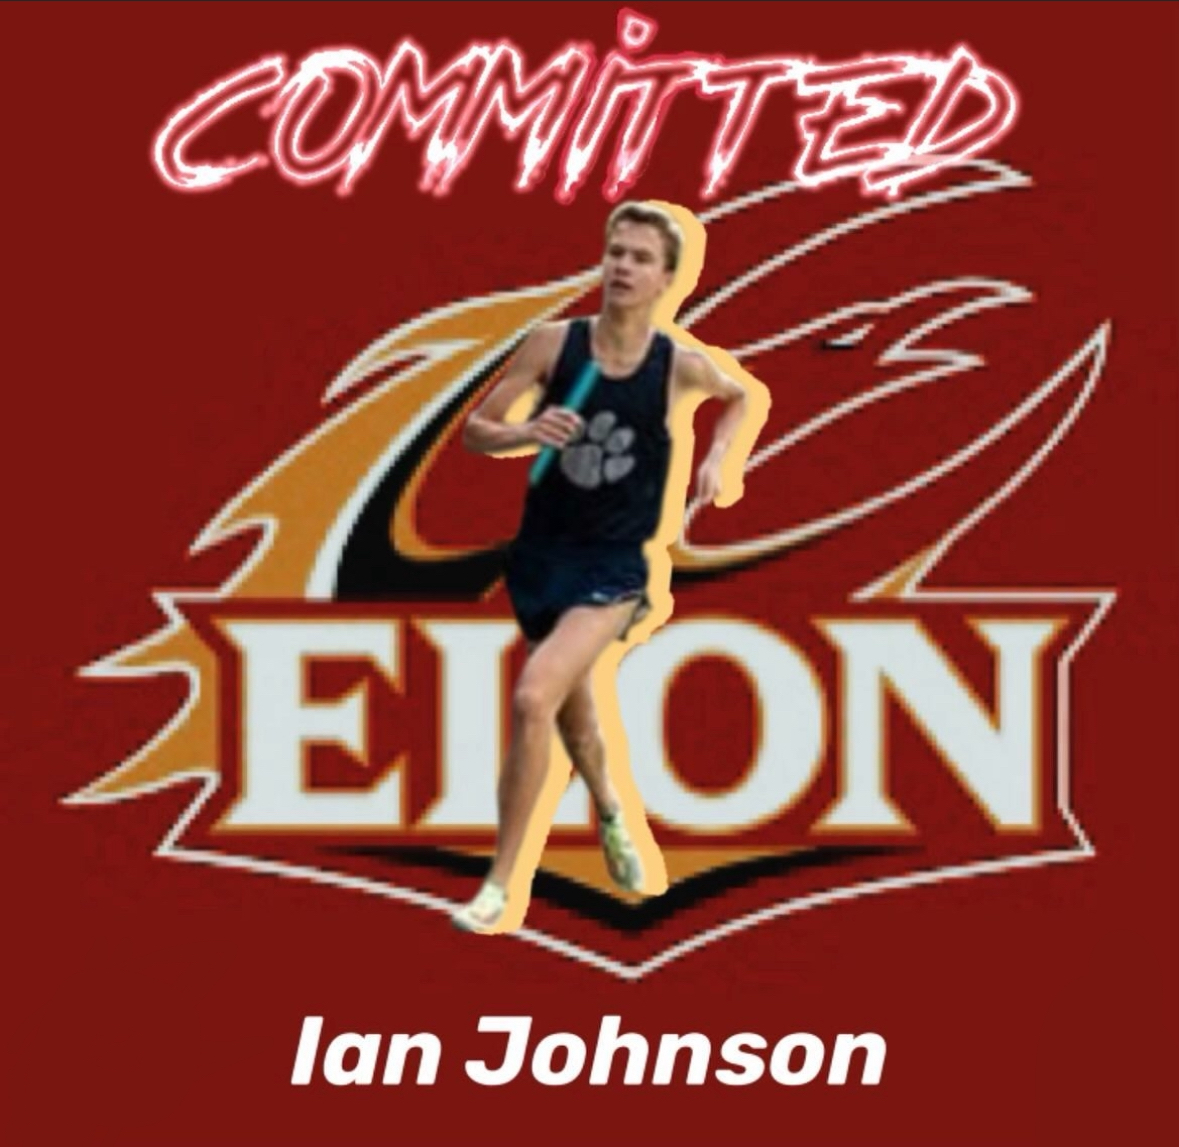 Ian+Johnson+uses+kindness+and+perseverance+to+attack+any+struggle+along+his+way.+He+used+these+skills+to+excel+in+both+school+and+running+to+commit+to+Elon+University+for+track+and+cross+country.+